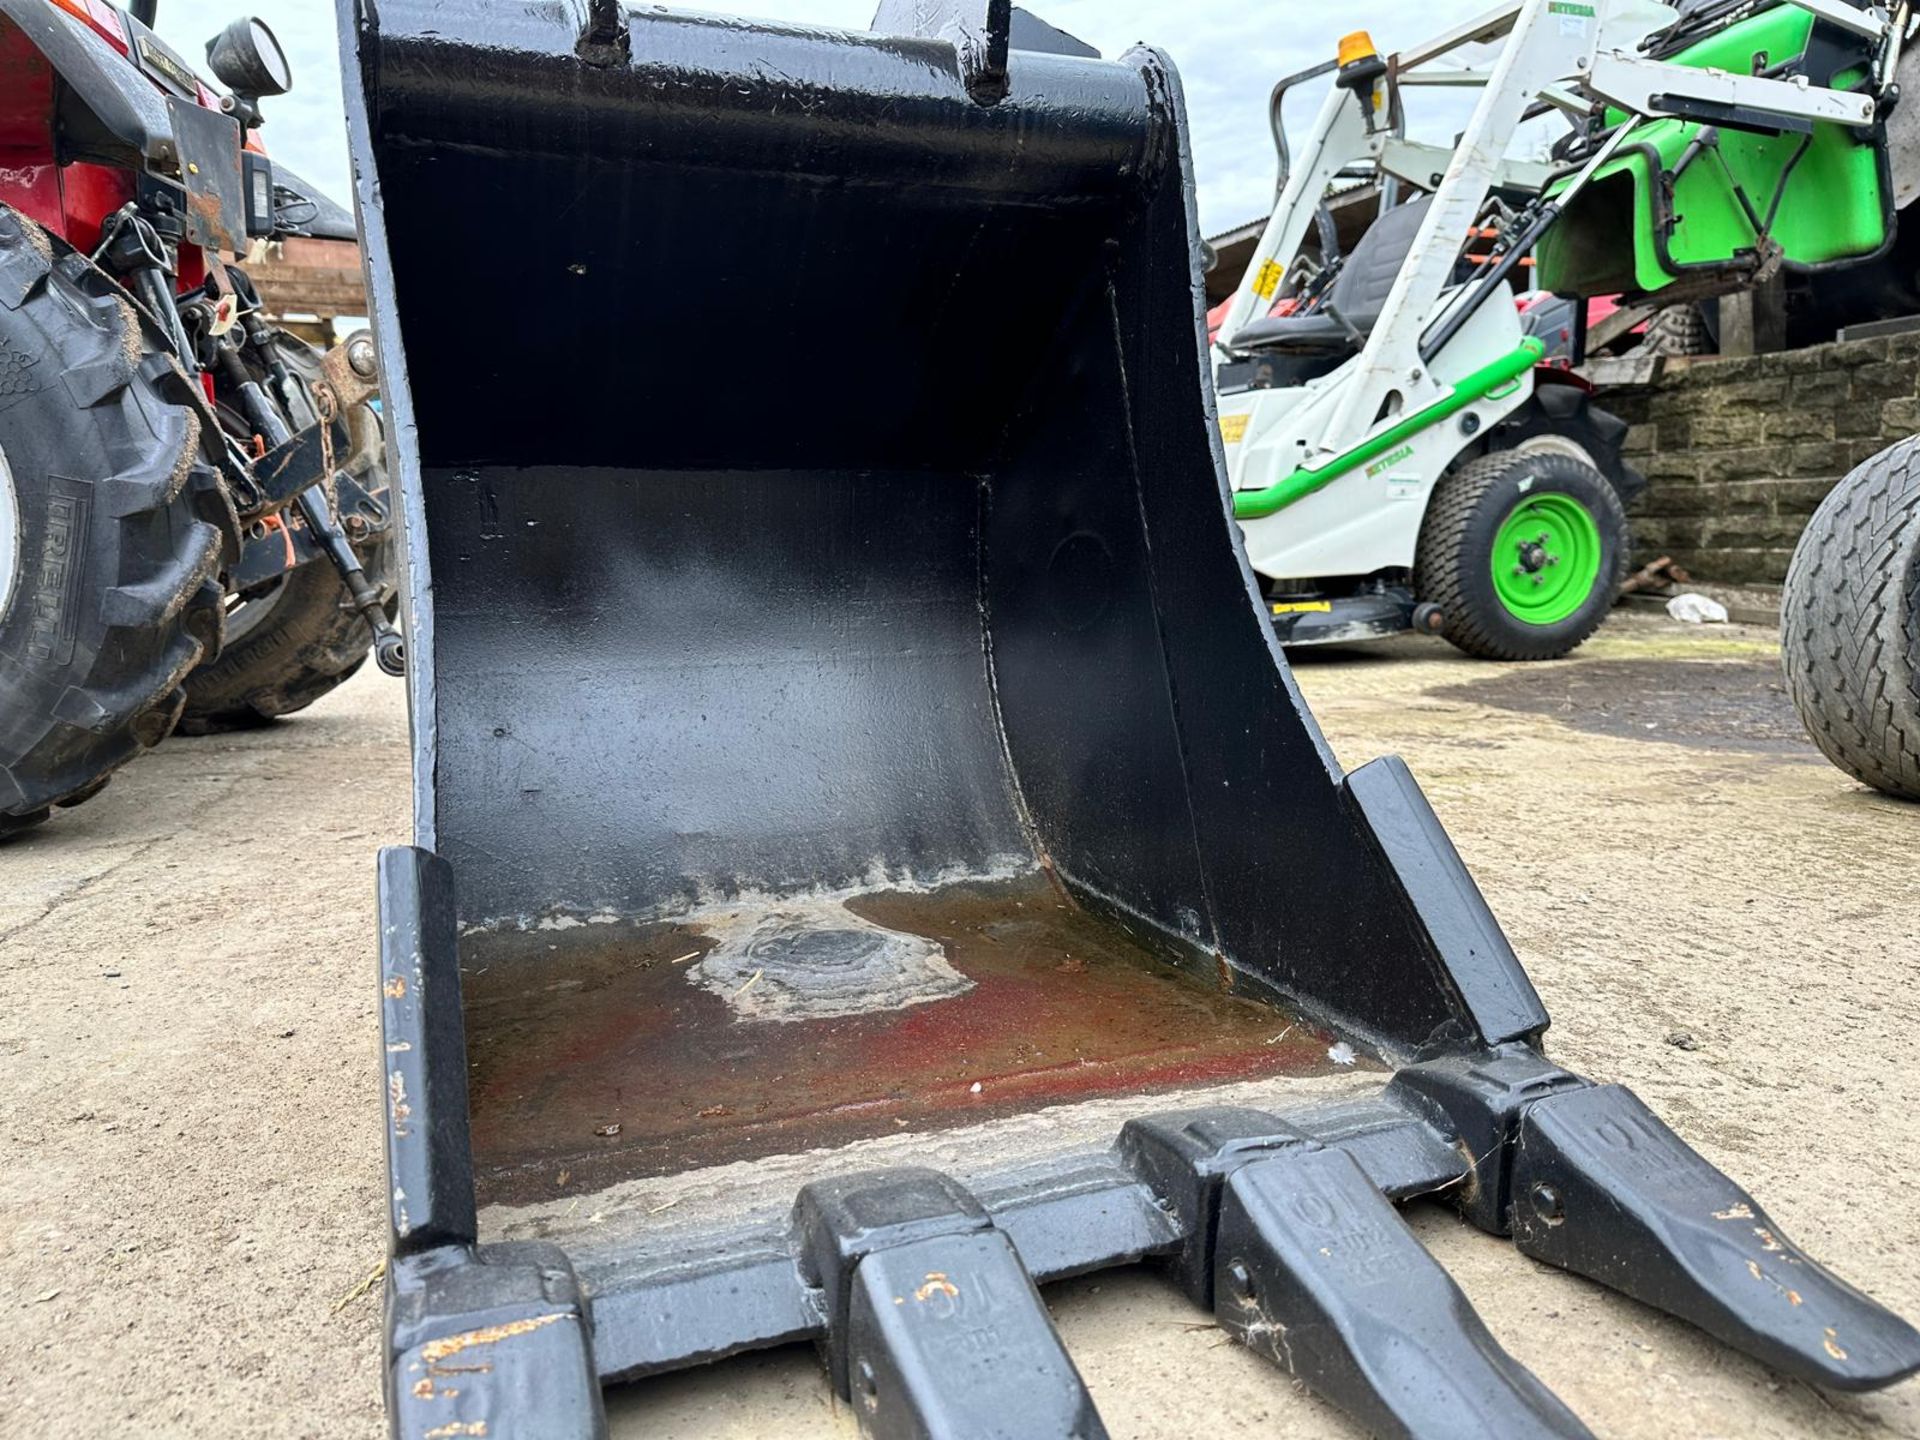 Strickland 24” Digging Bucket With Teeth, Came Of Bobcat E80, Brand New Teeth *PLUS VAT*